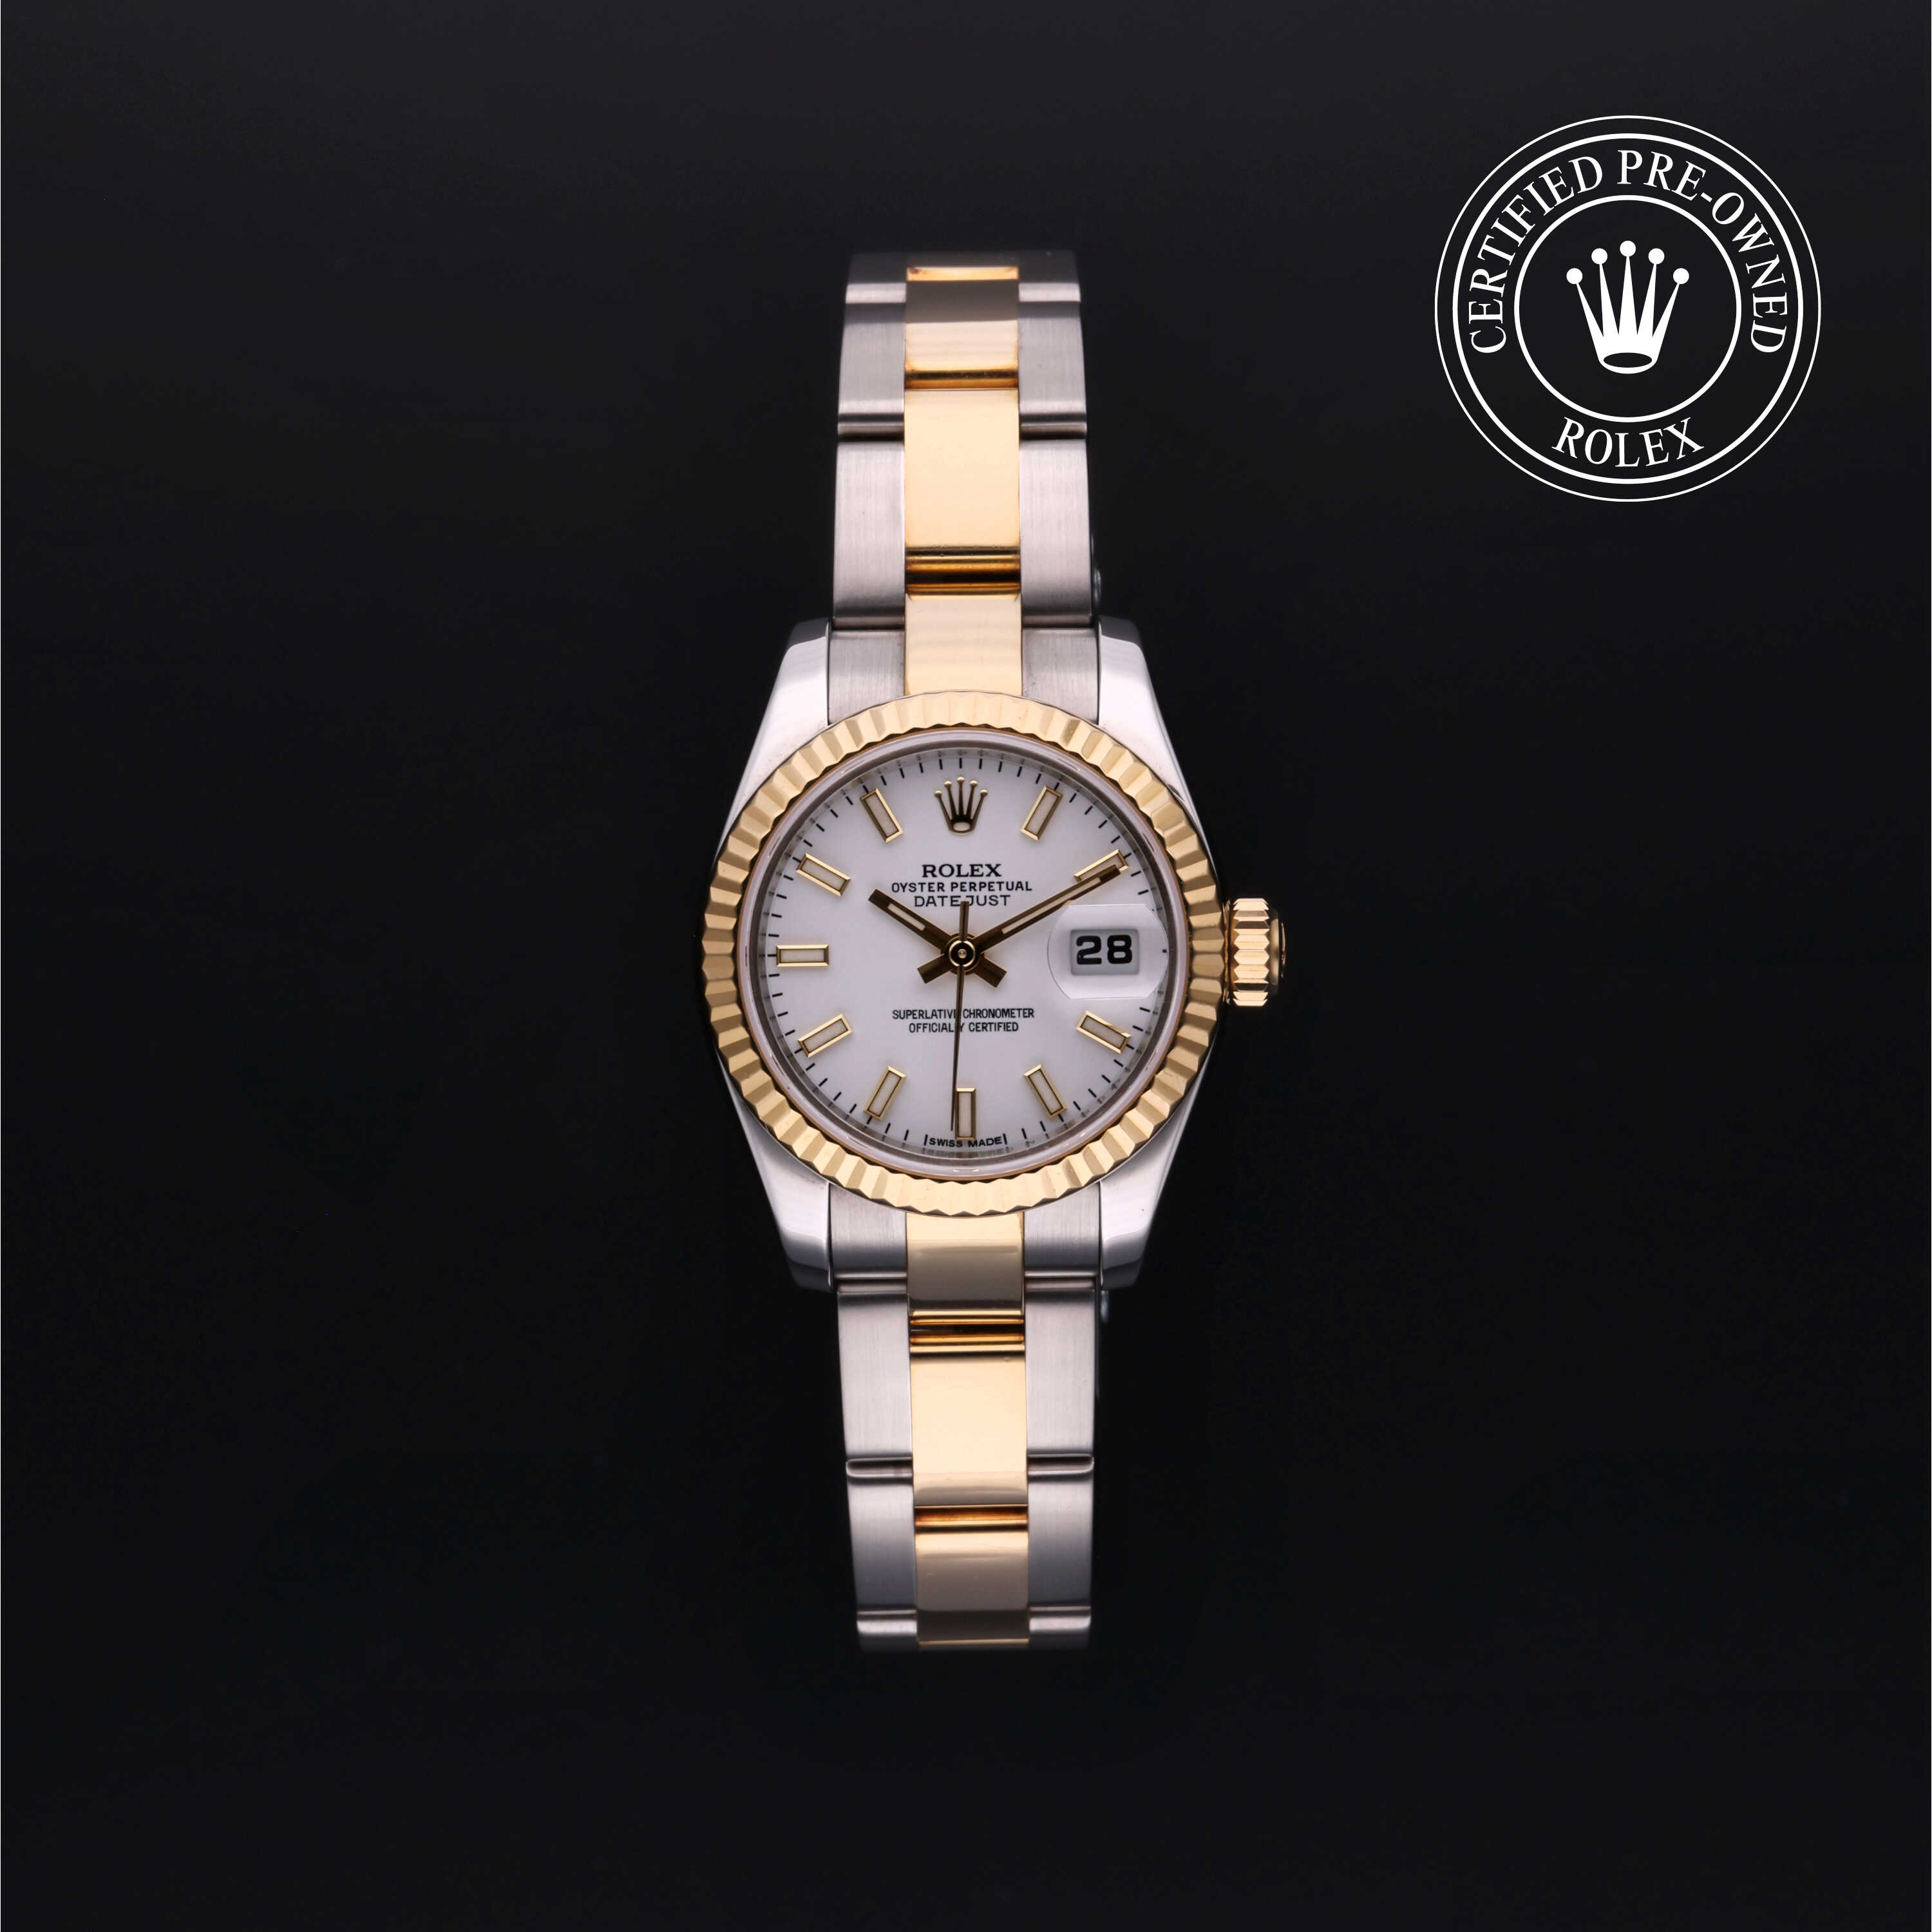 2007 Oyster Perpetual Lady-Datejust 26